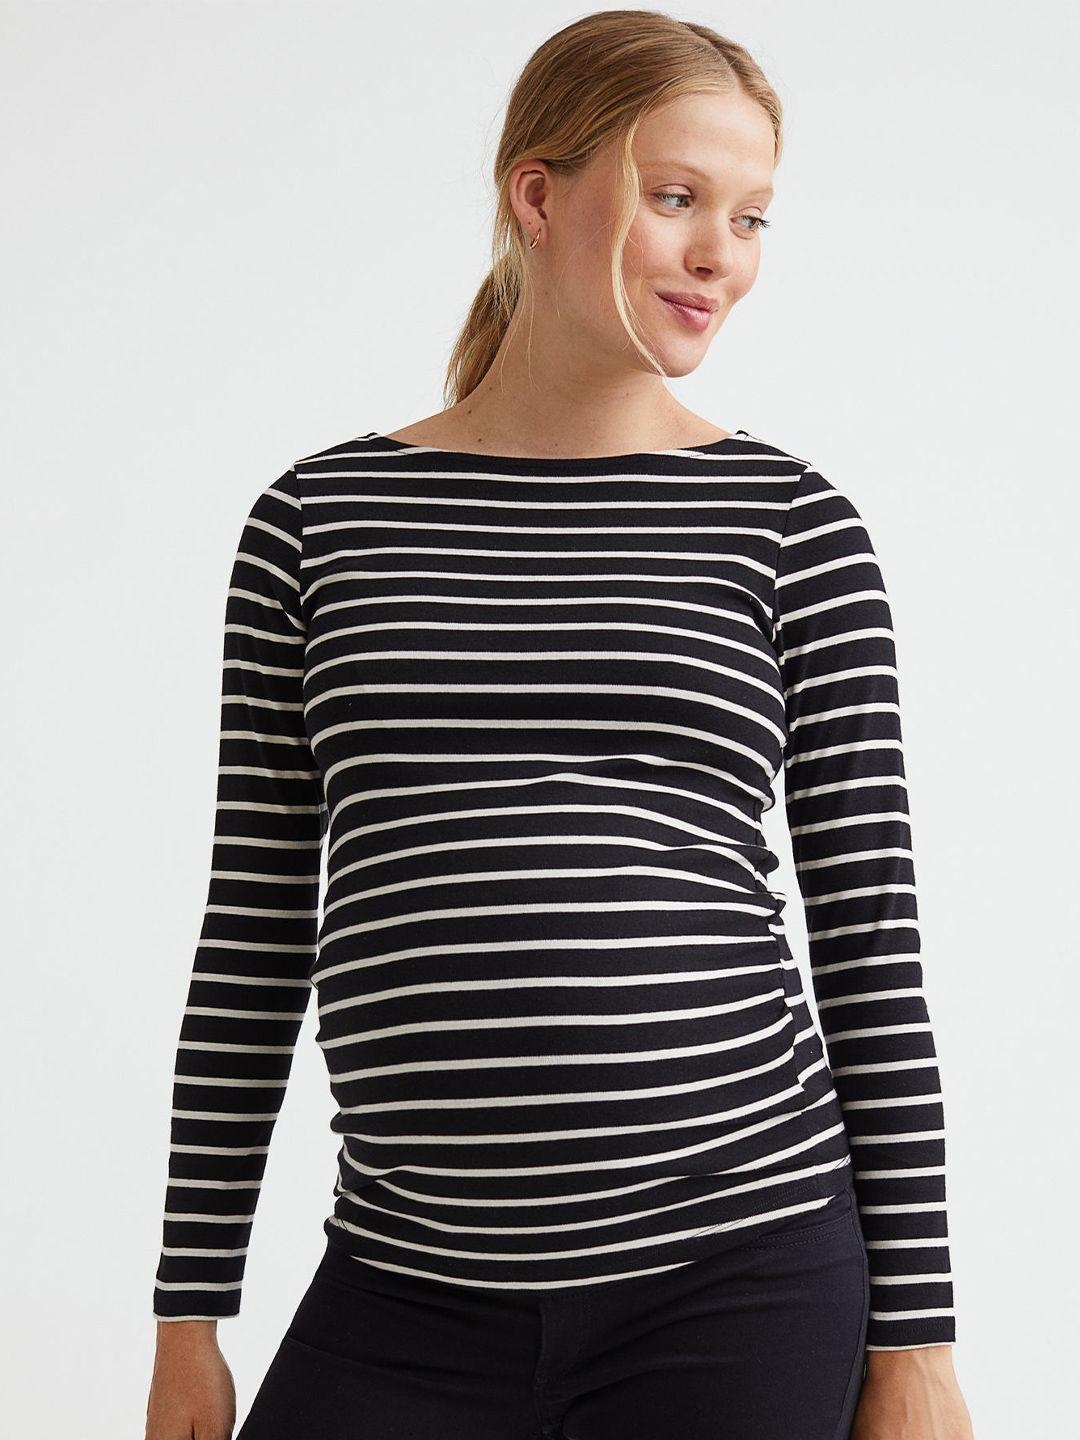 h&m women mama black & white striped long-sleeved cotton top